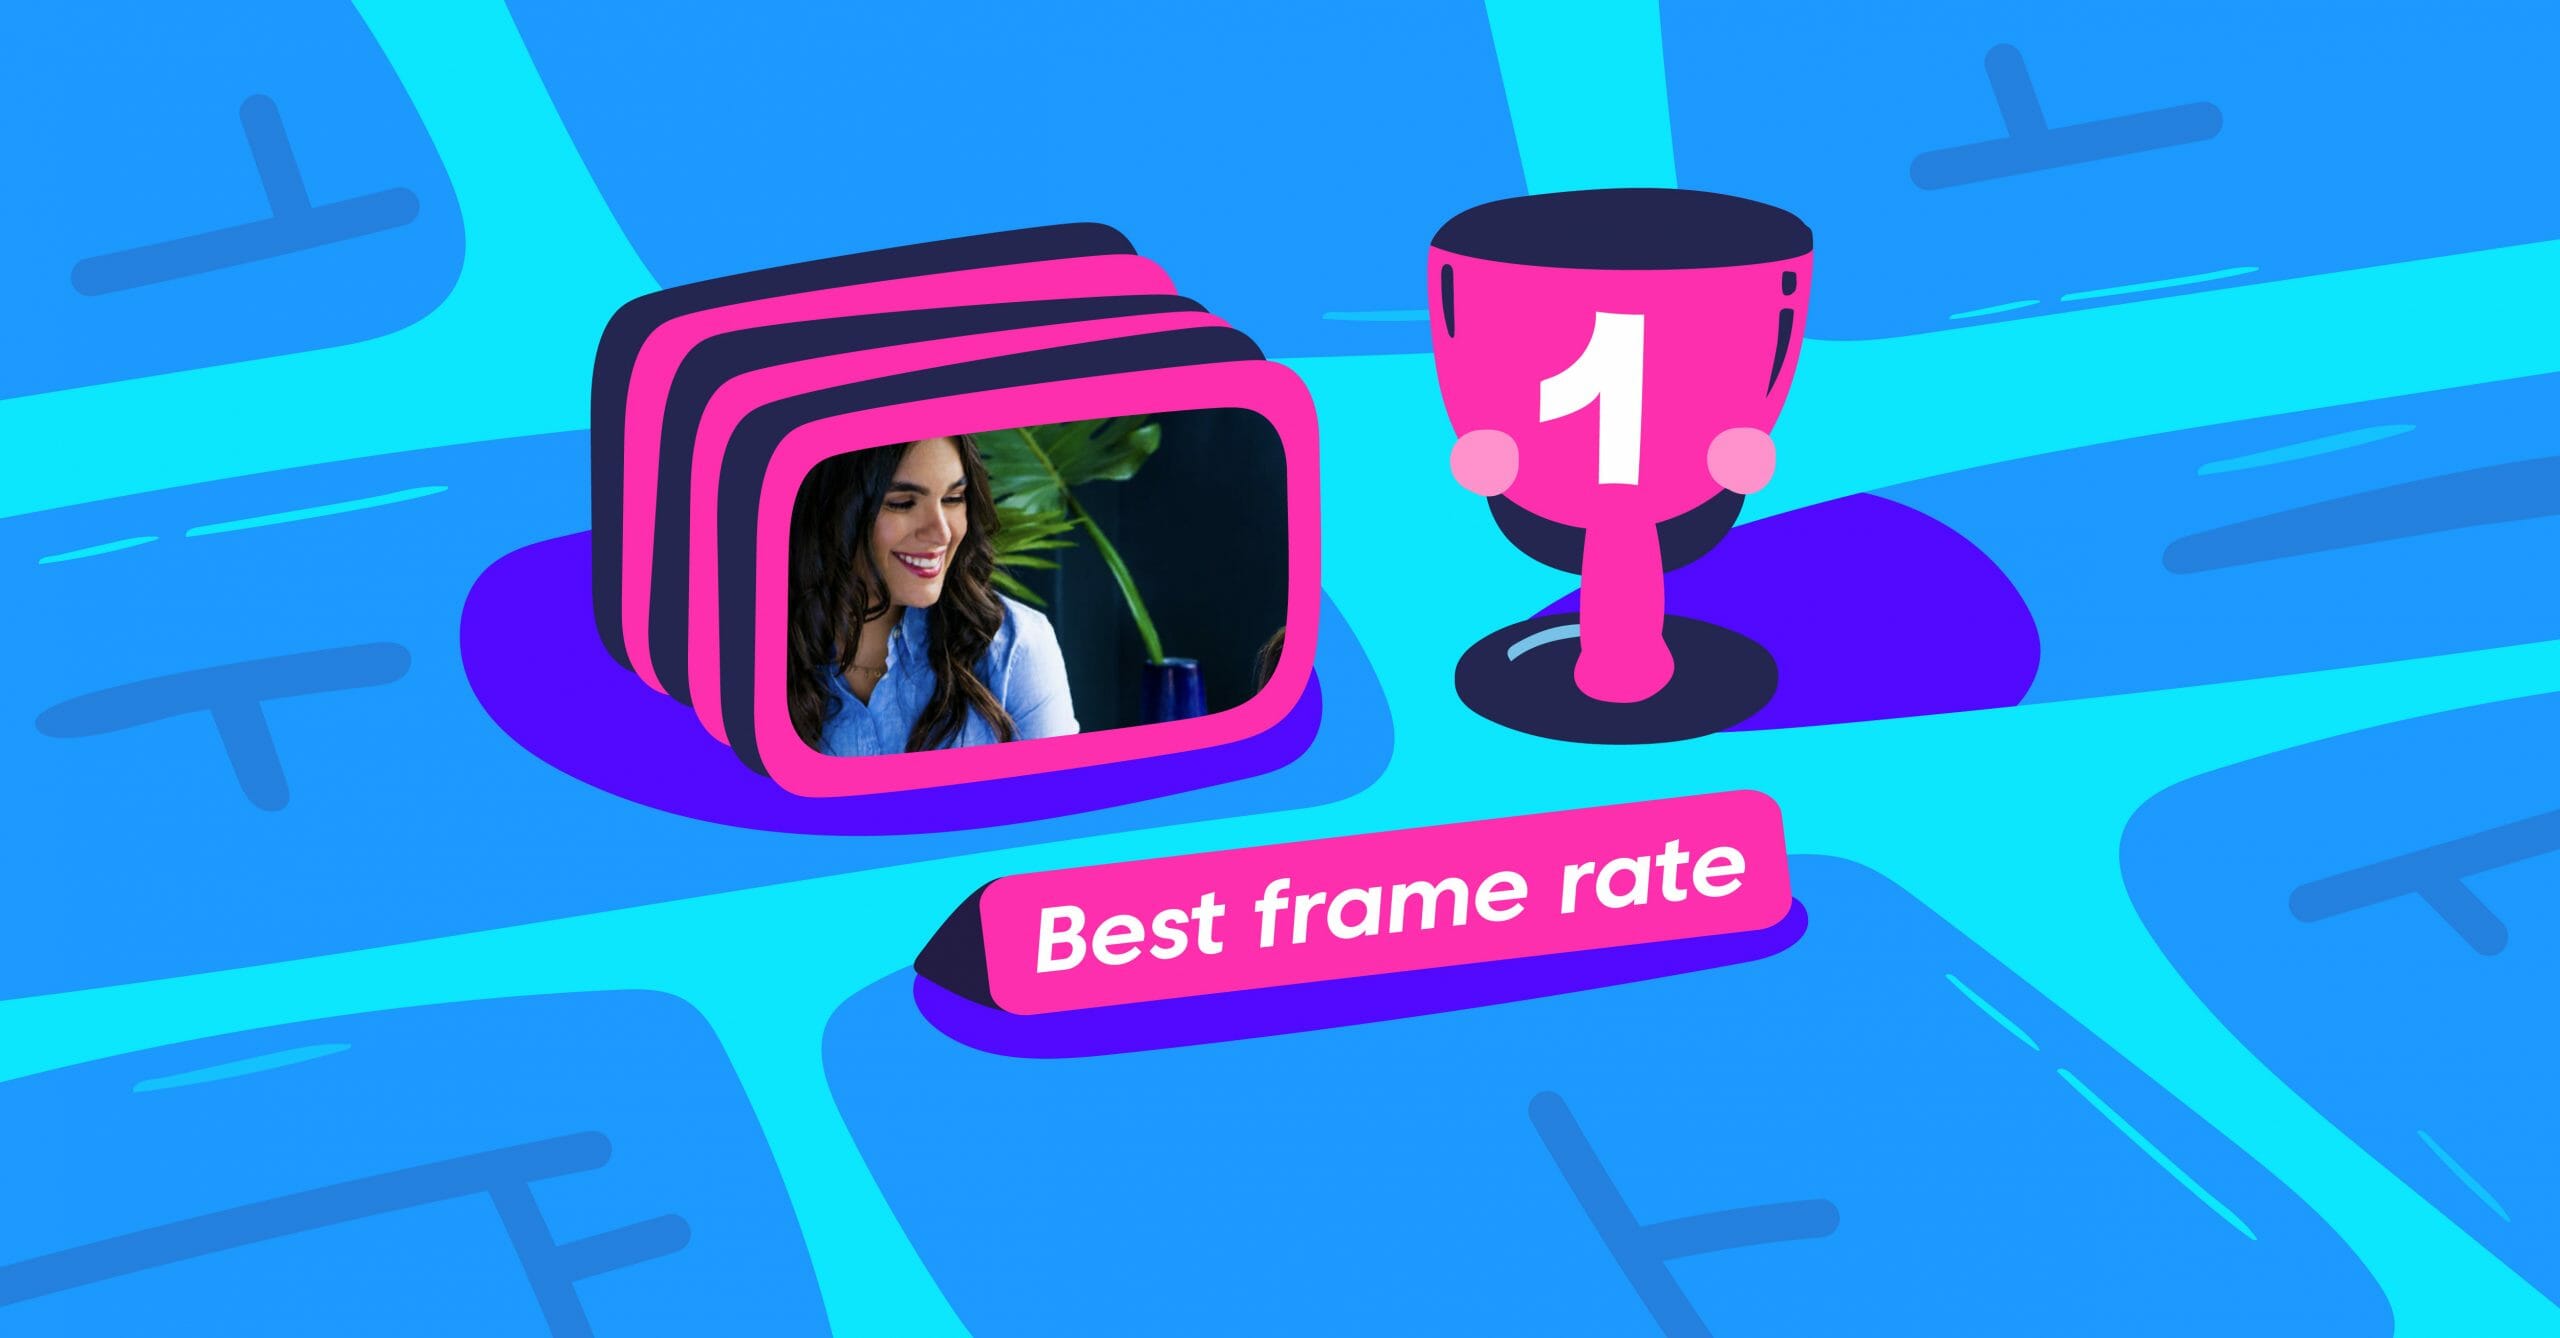 How to Choose the Best Frame Rate for Live Streaming